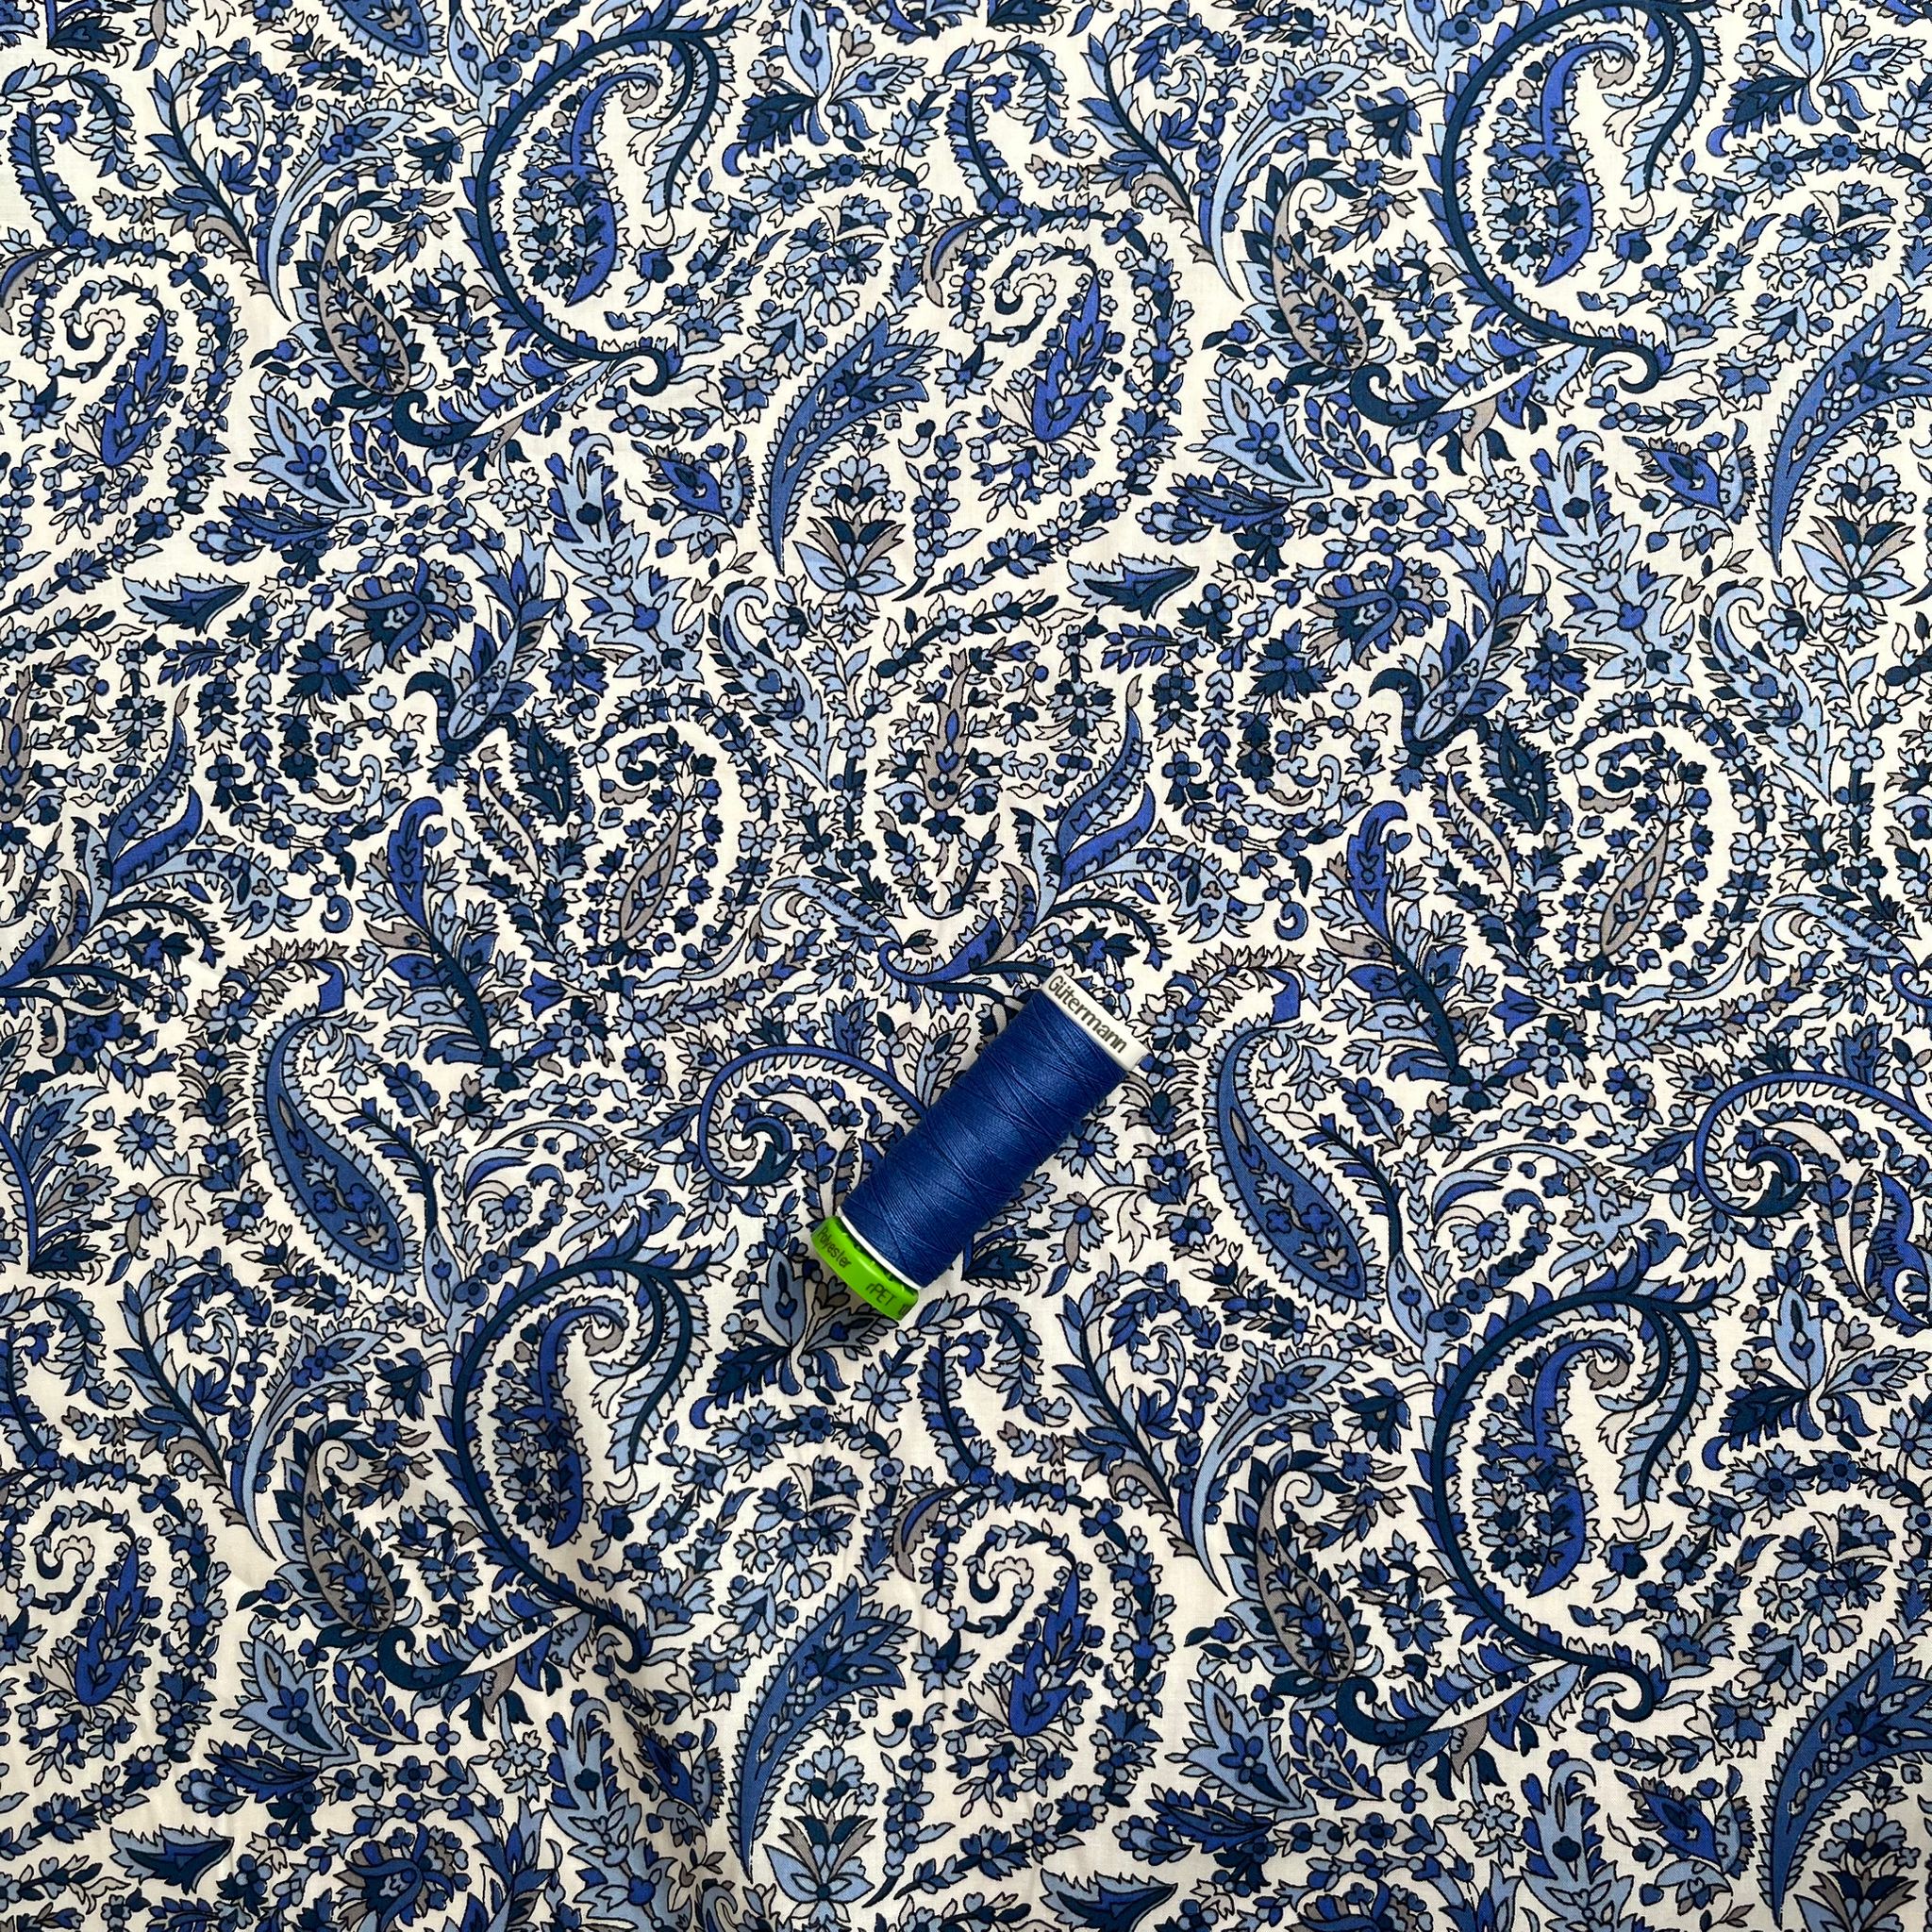 Vintage Paisley in Blue Cotton Lawn Fabric